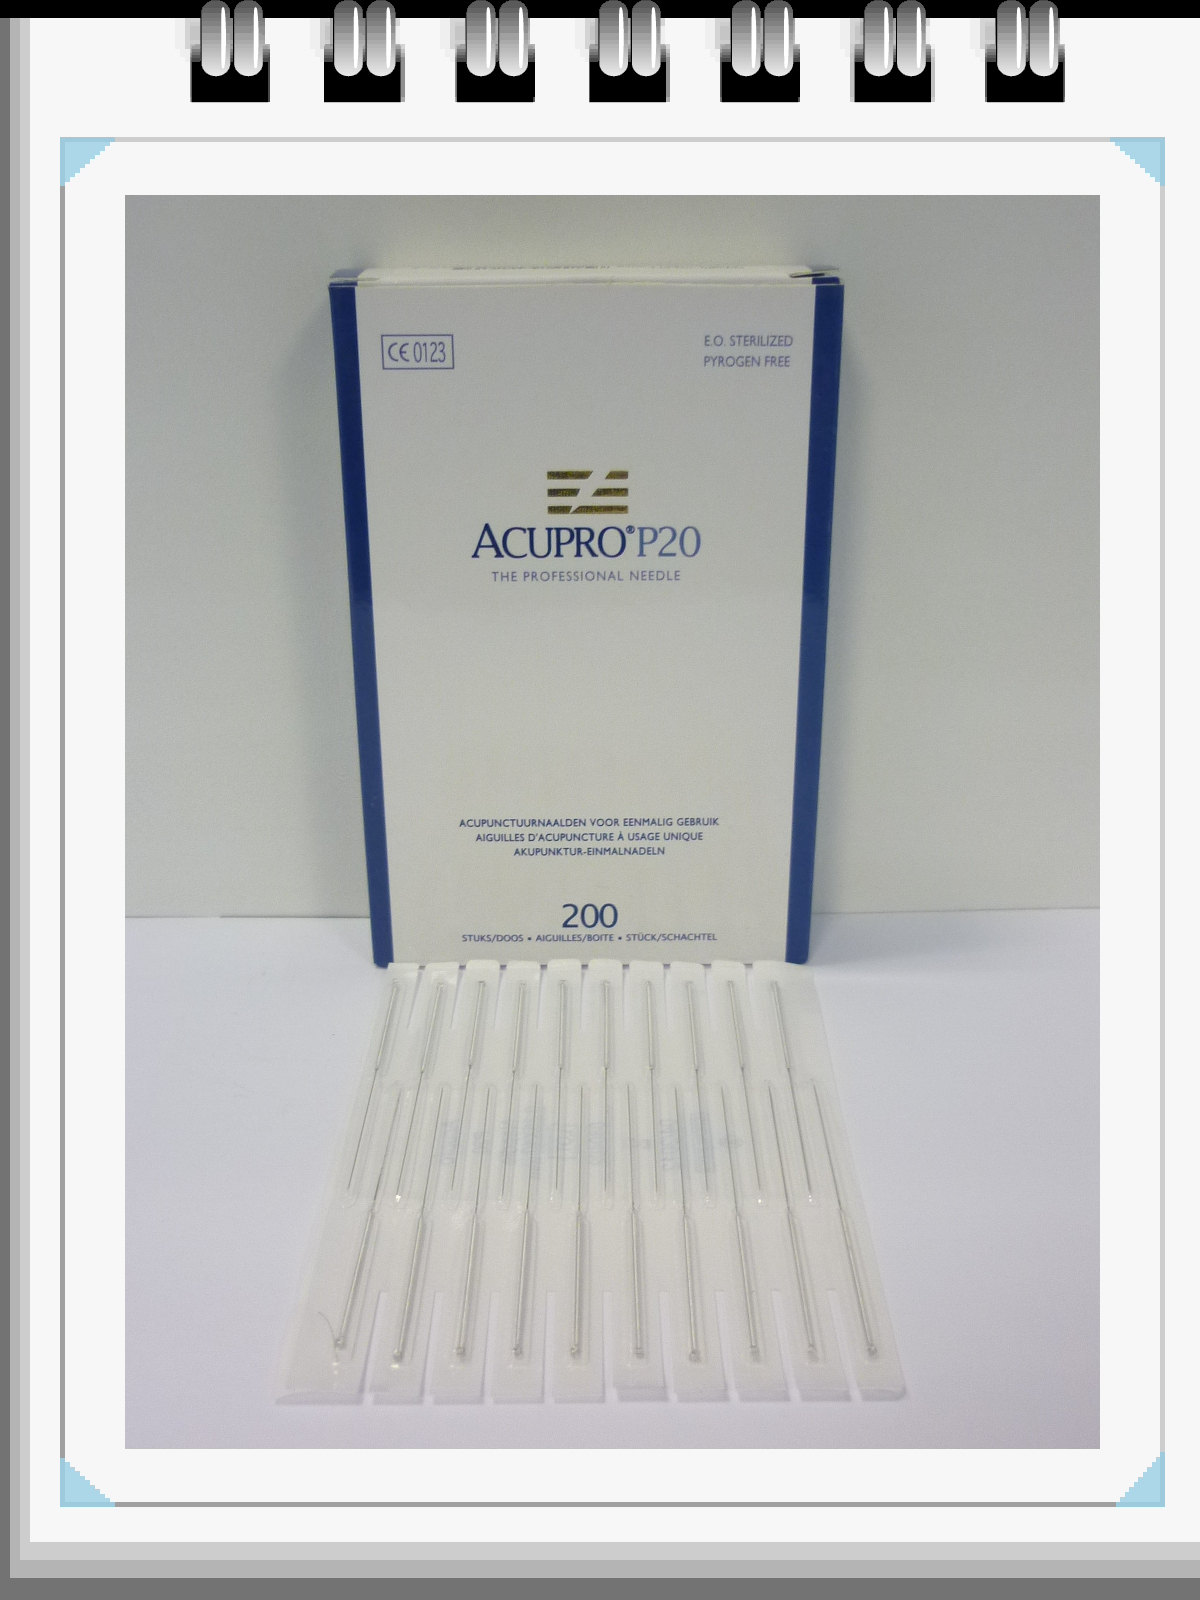 All Products - Acupunctuurnaalden: 0,25 x 40mm, p--200